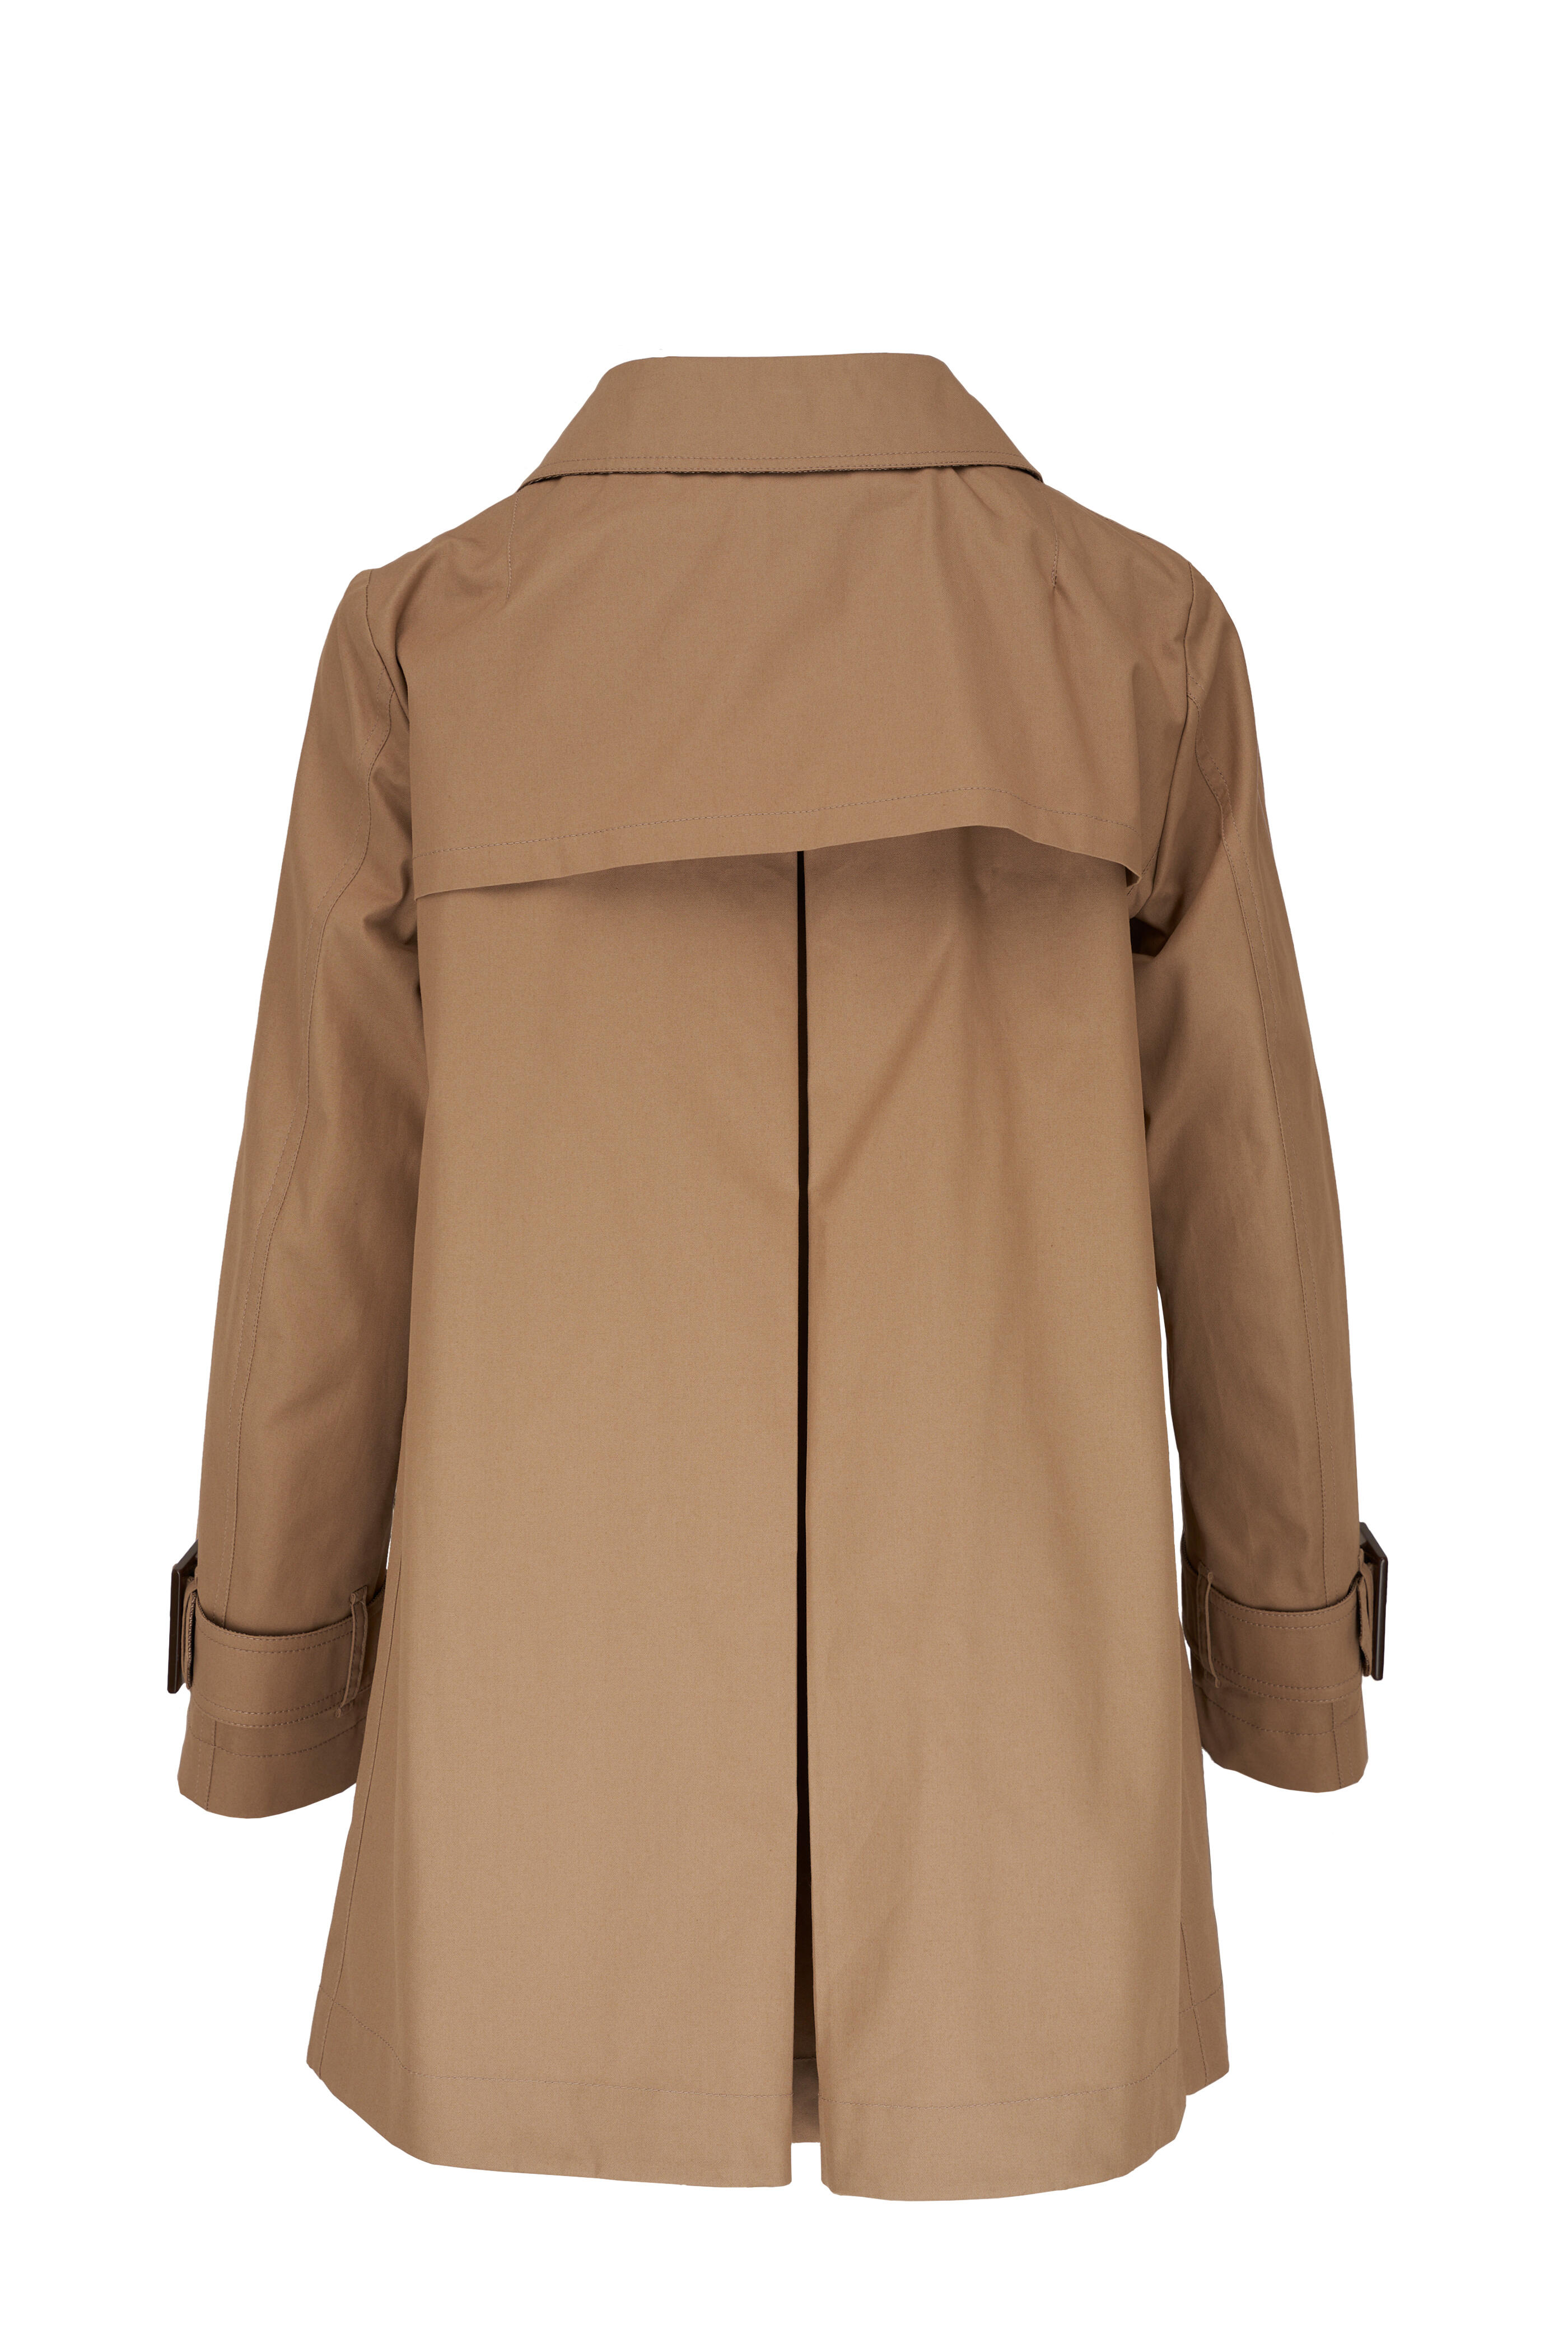 Herno - Delon Sand Cotton Trench Coat | Mitchell Stores